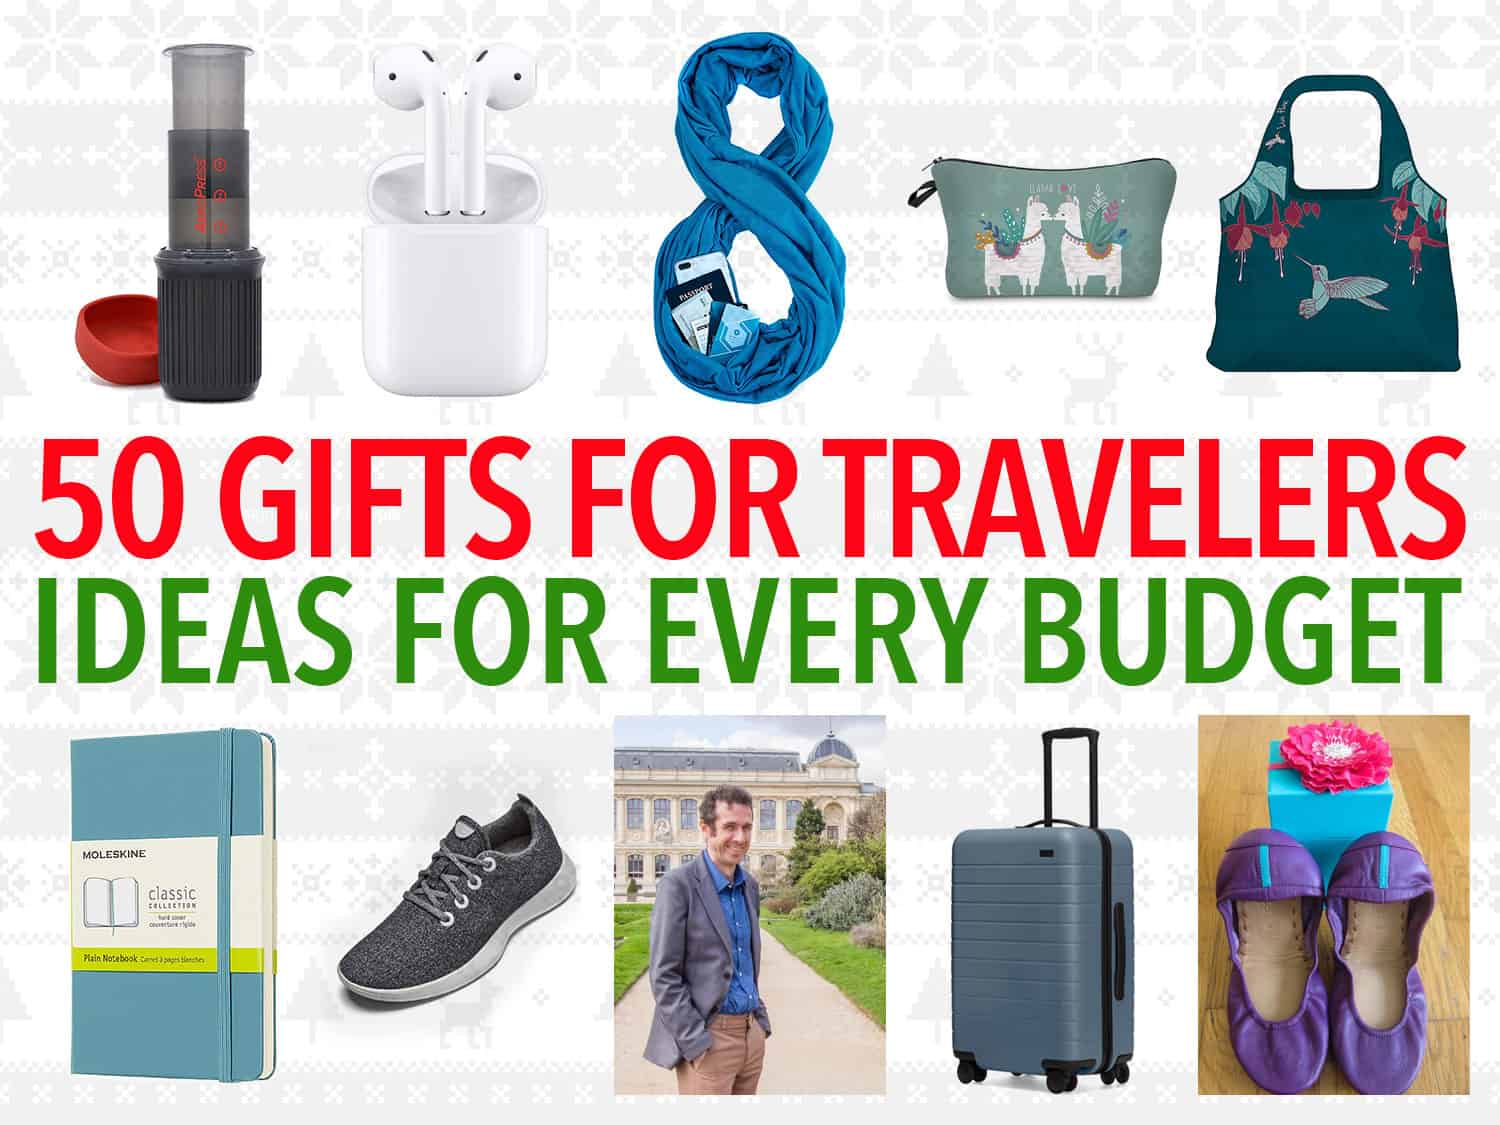 40 Best Gifts Under $100, picked by our gift experts - Reviewed